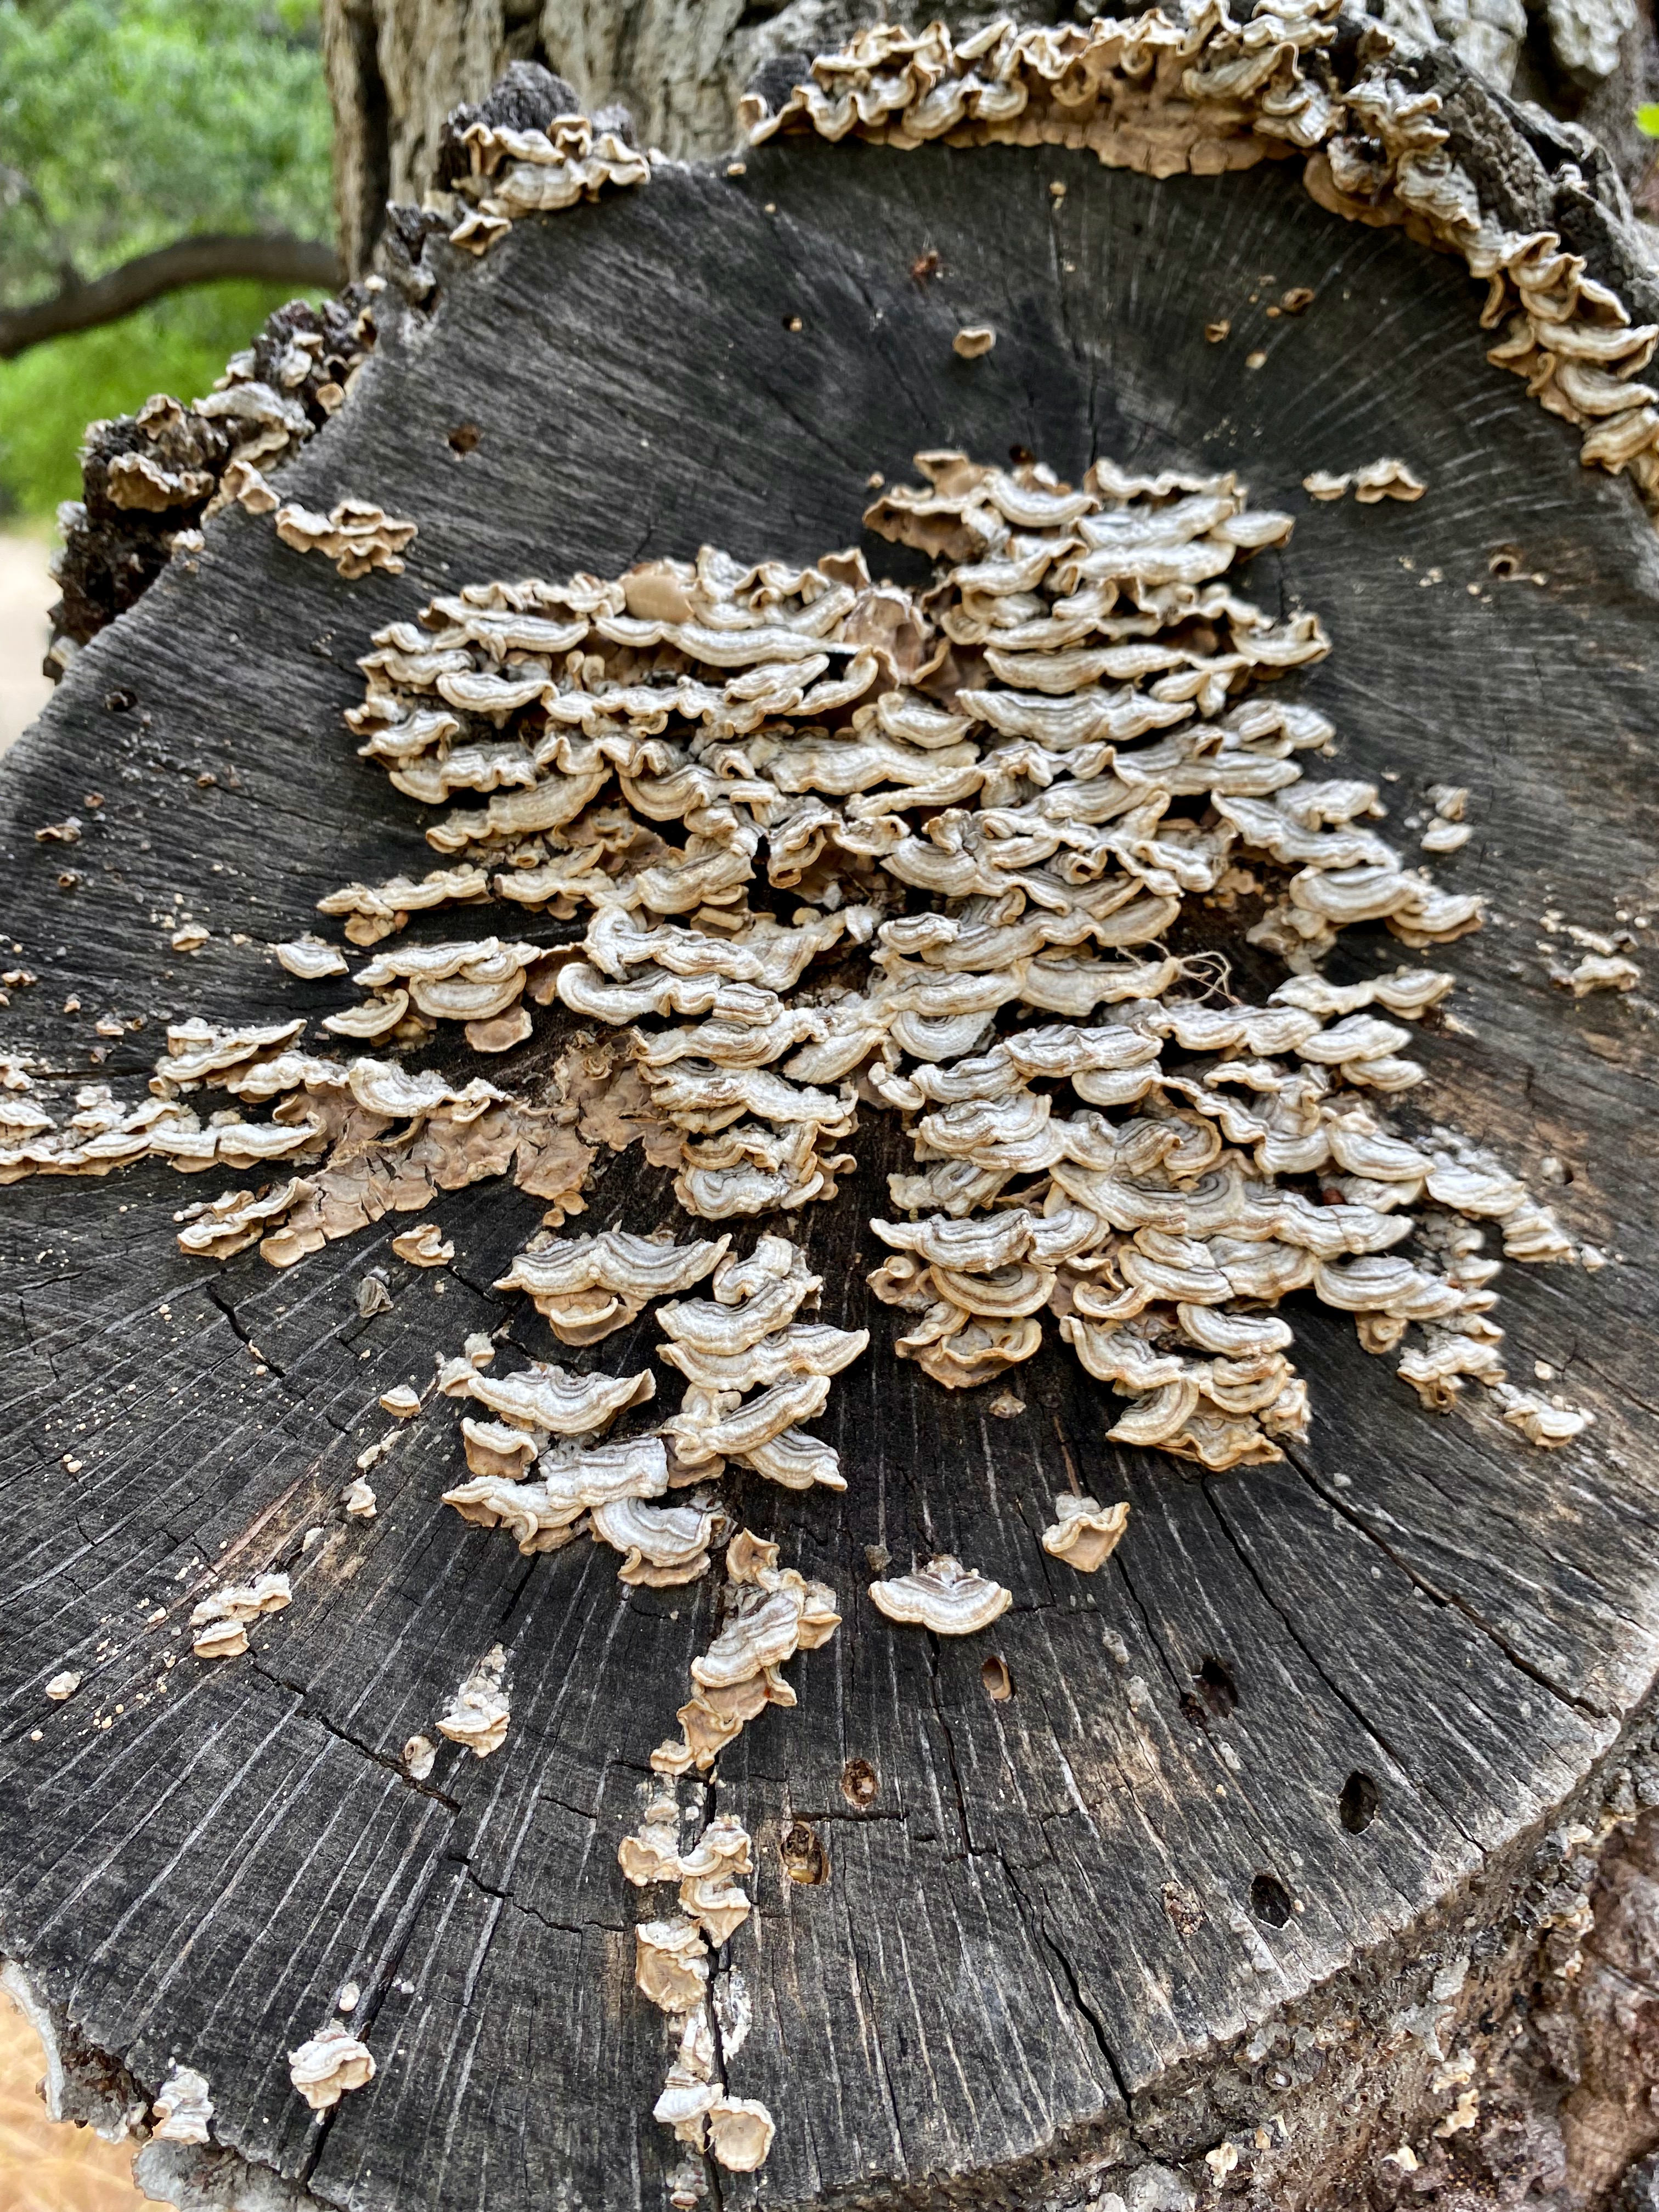 A close up photo of hairy crust curtain fungus (false turkey tail or Stereum hirsutum) growing on an oak tree in Placerita Canyon.